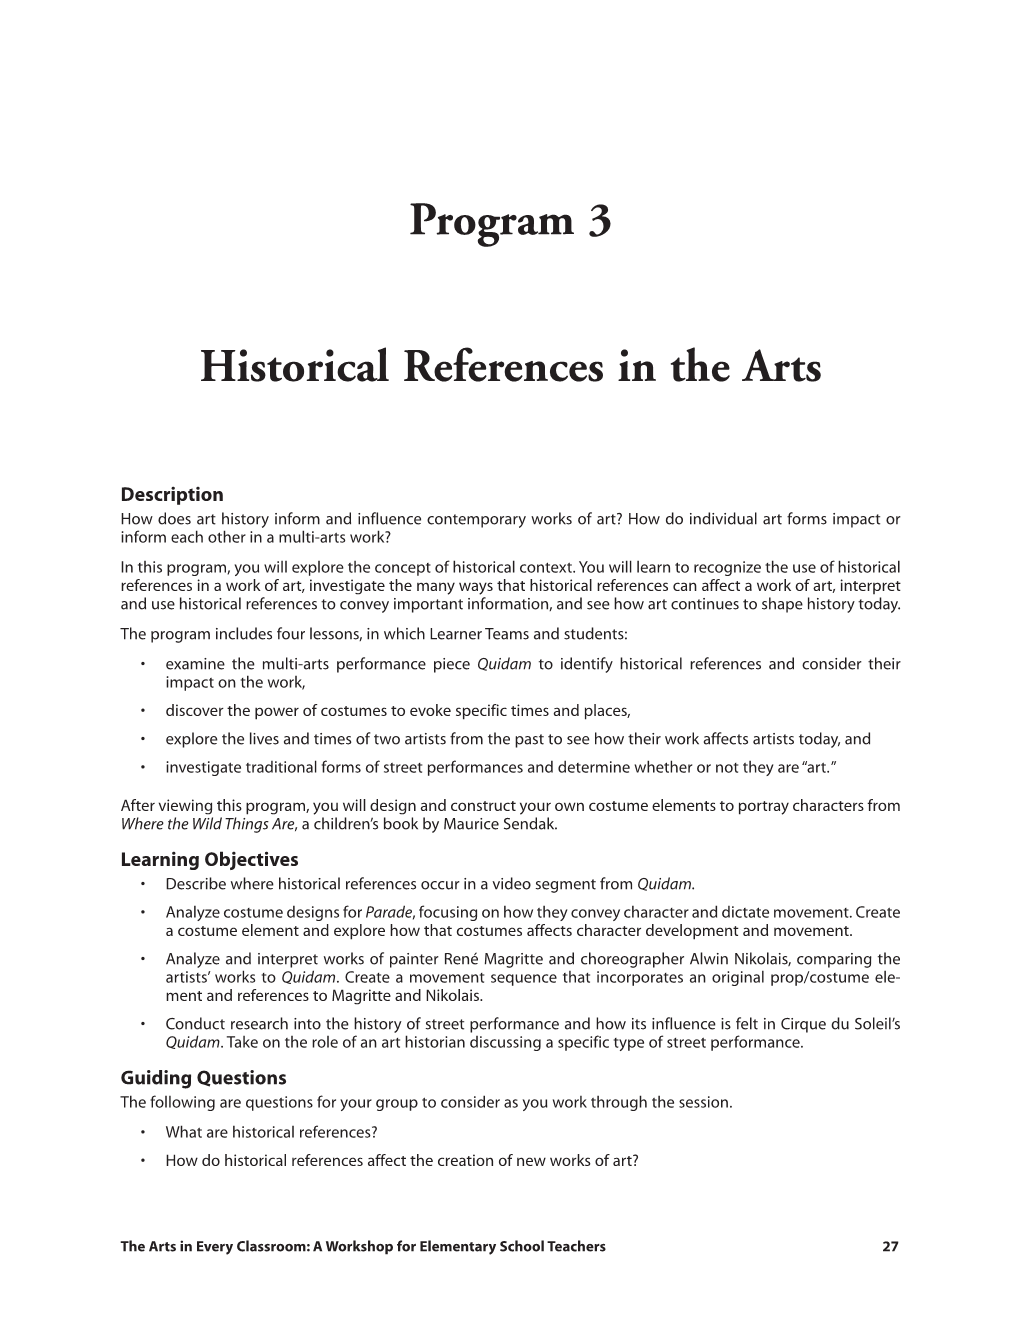 Course Guide Program 3. Historical References in the Arts